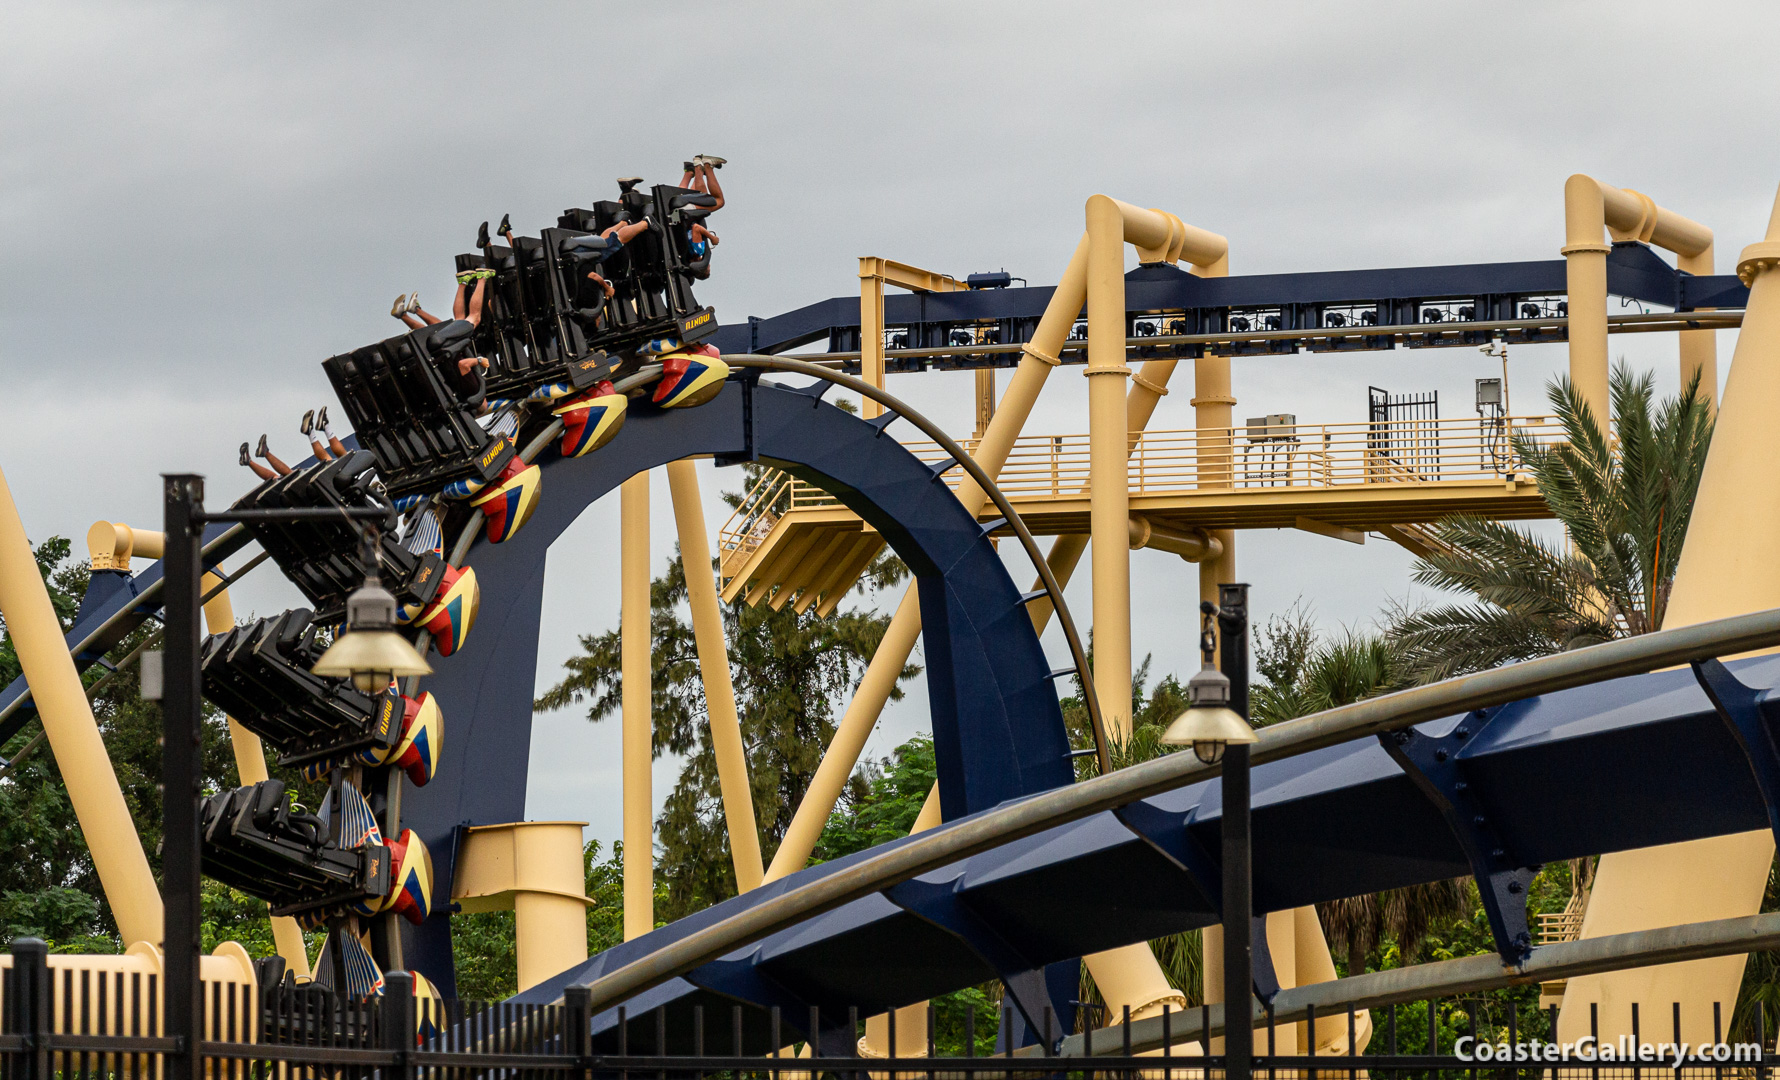 Pictures of the Florida looping roller coaster